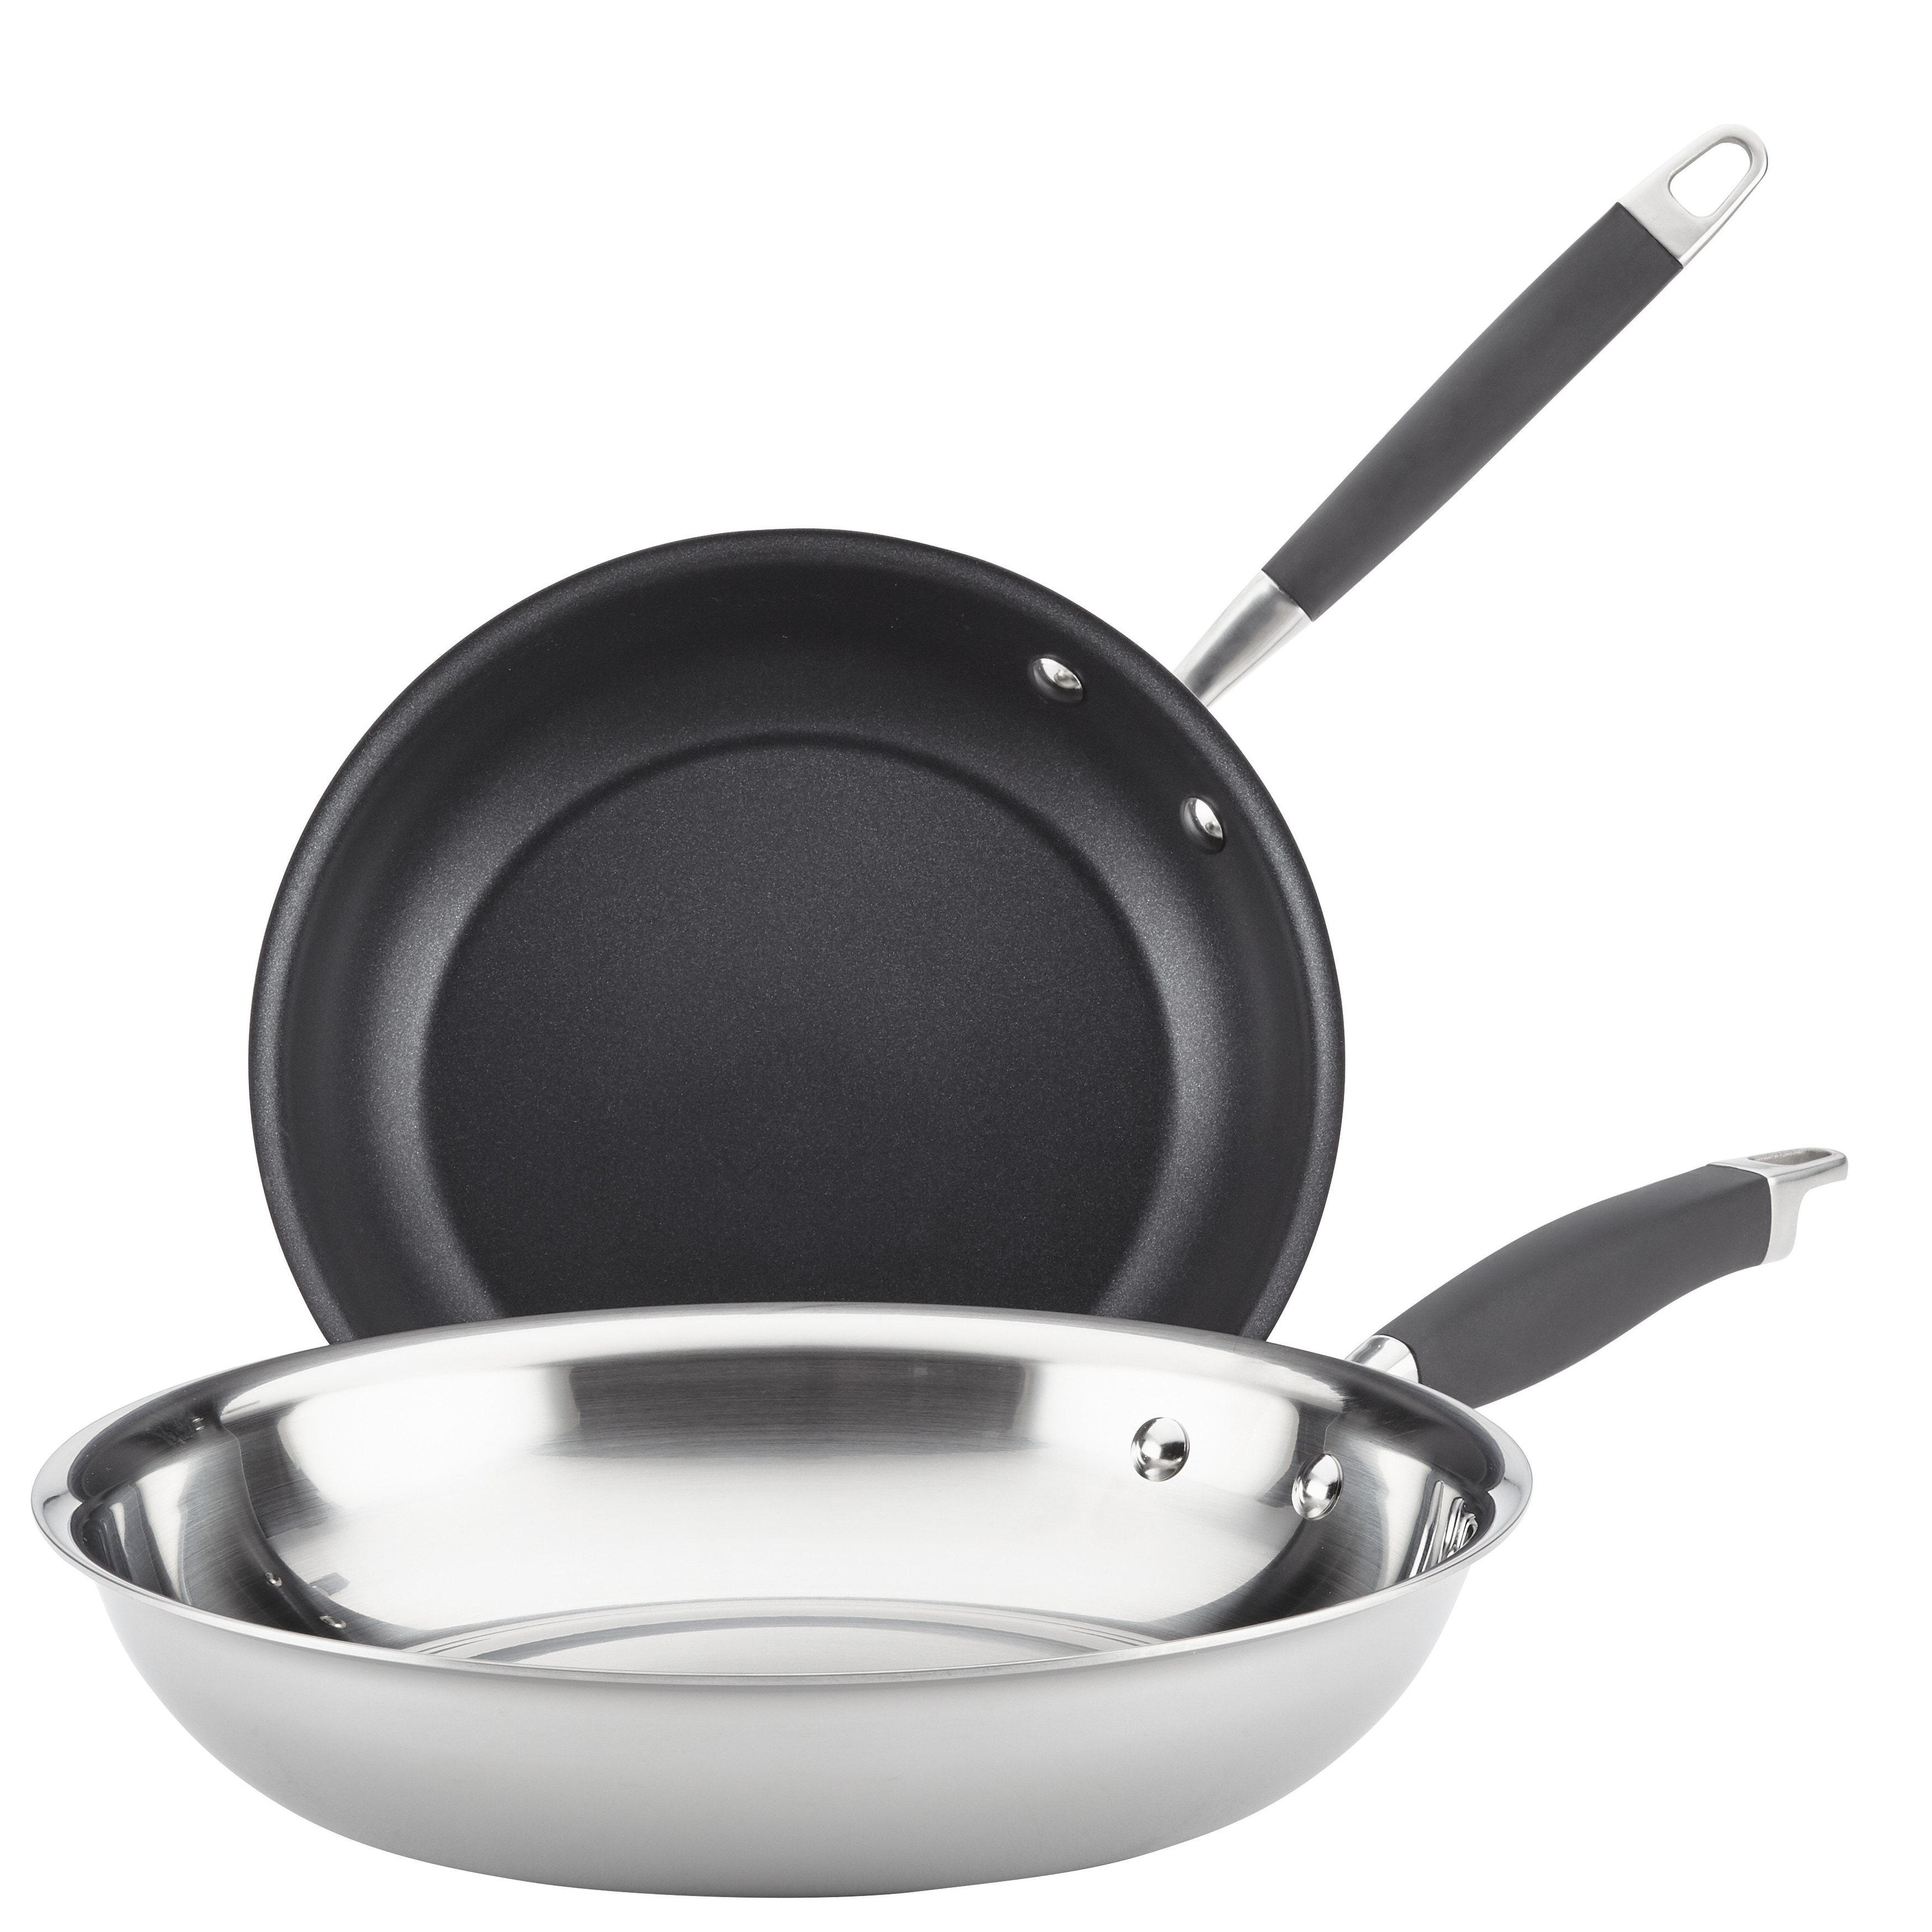 https://ak1.ostkcdn.com/images/products/is/images/direct/a5d17629b5de36a2b62eb9de311fc5d48a3d84f7/Anolon-Tri-Ply-Onyx-Stainless-Steel-French-Skillet%2C-Twin-Pack.jpg